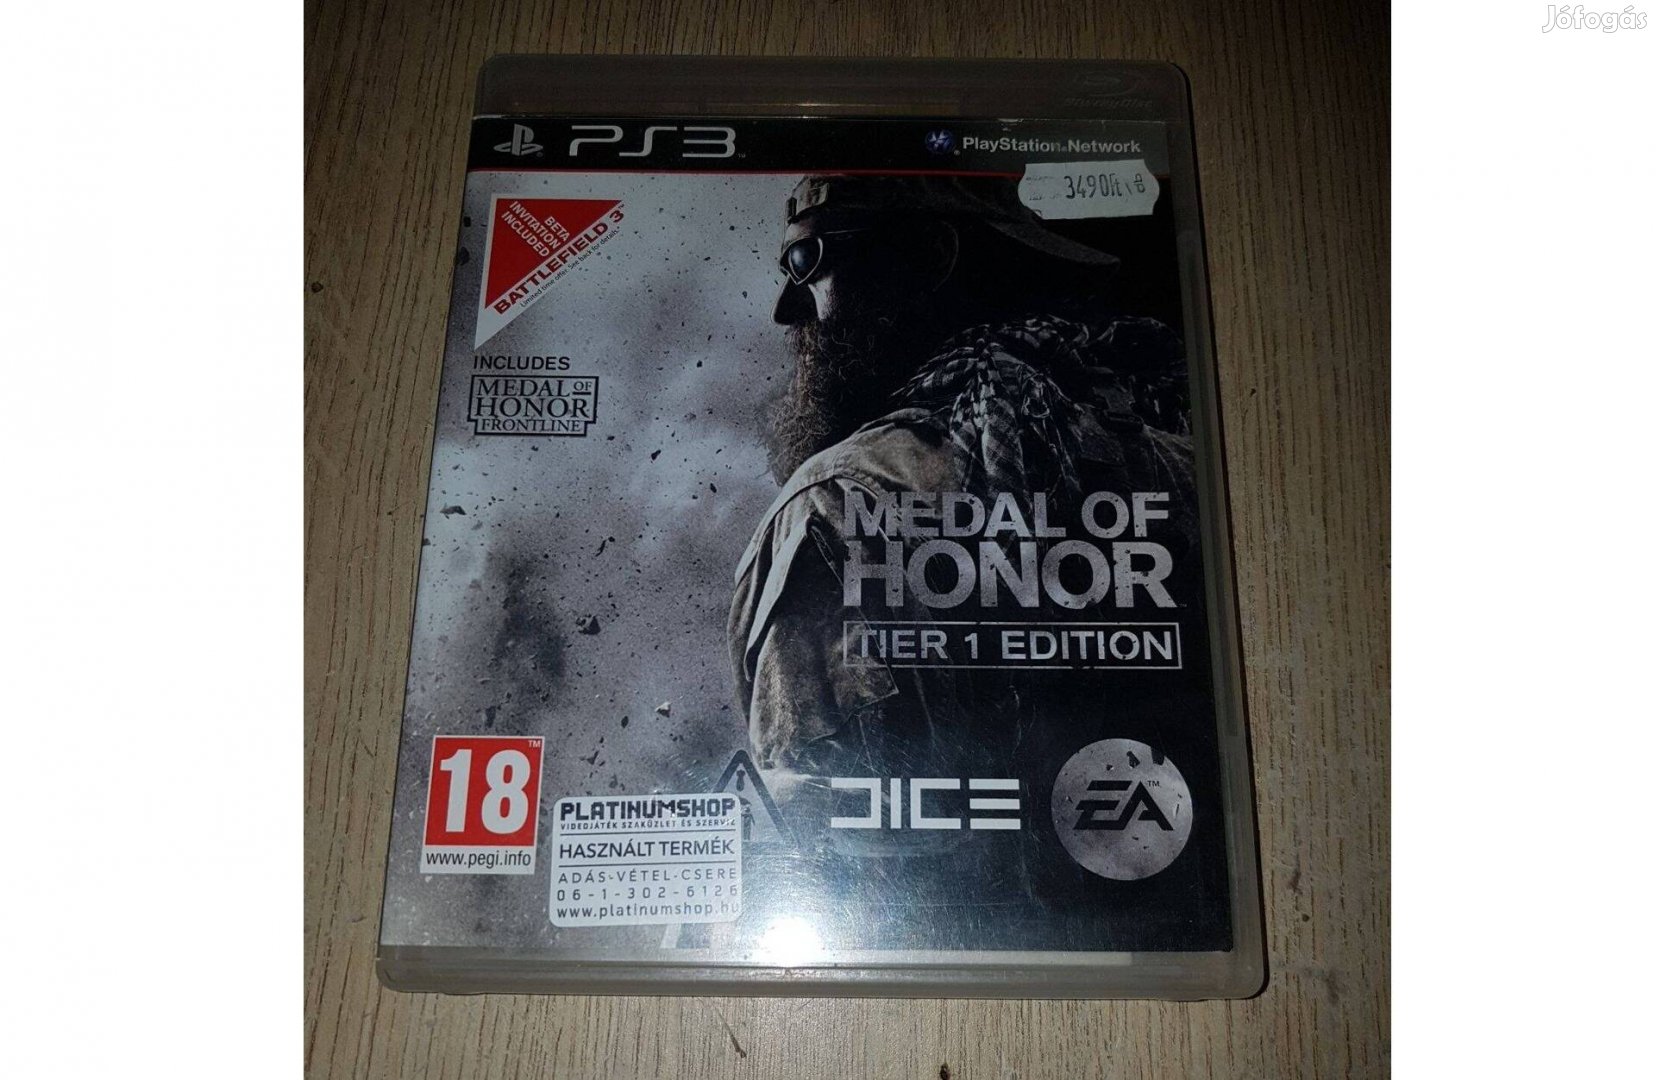 Ps3 medal of honor limited edition eladó